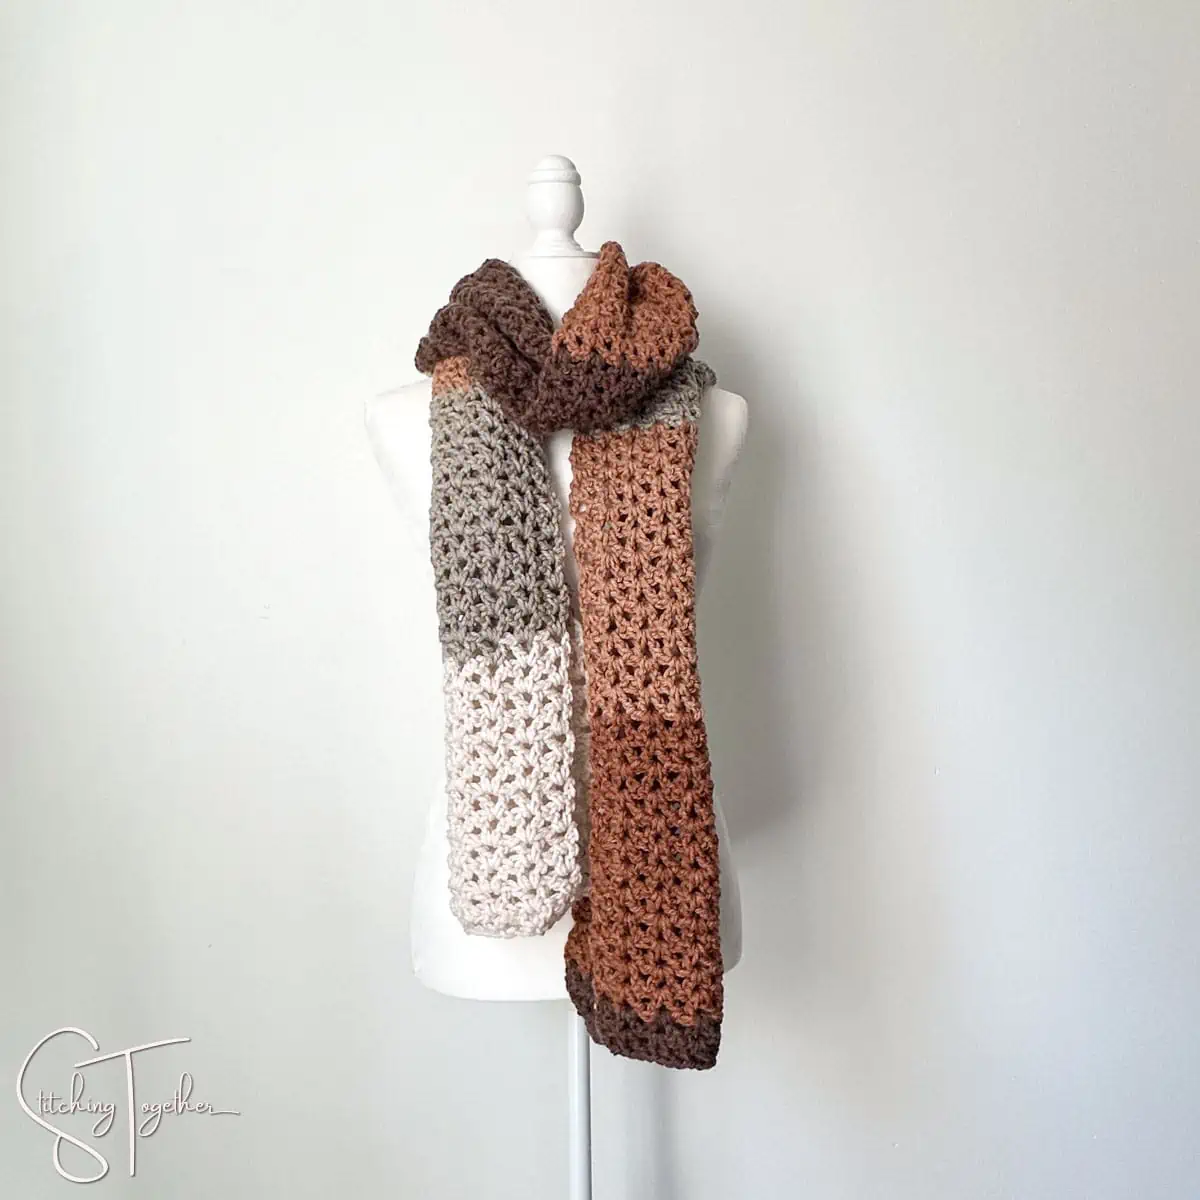 Quick and Easy Crochet V Stitch Scarf Free Pattern